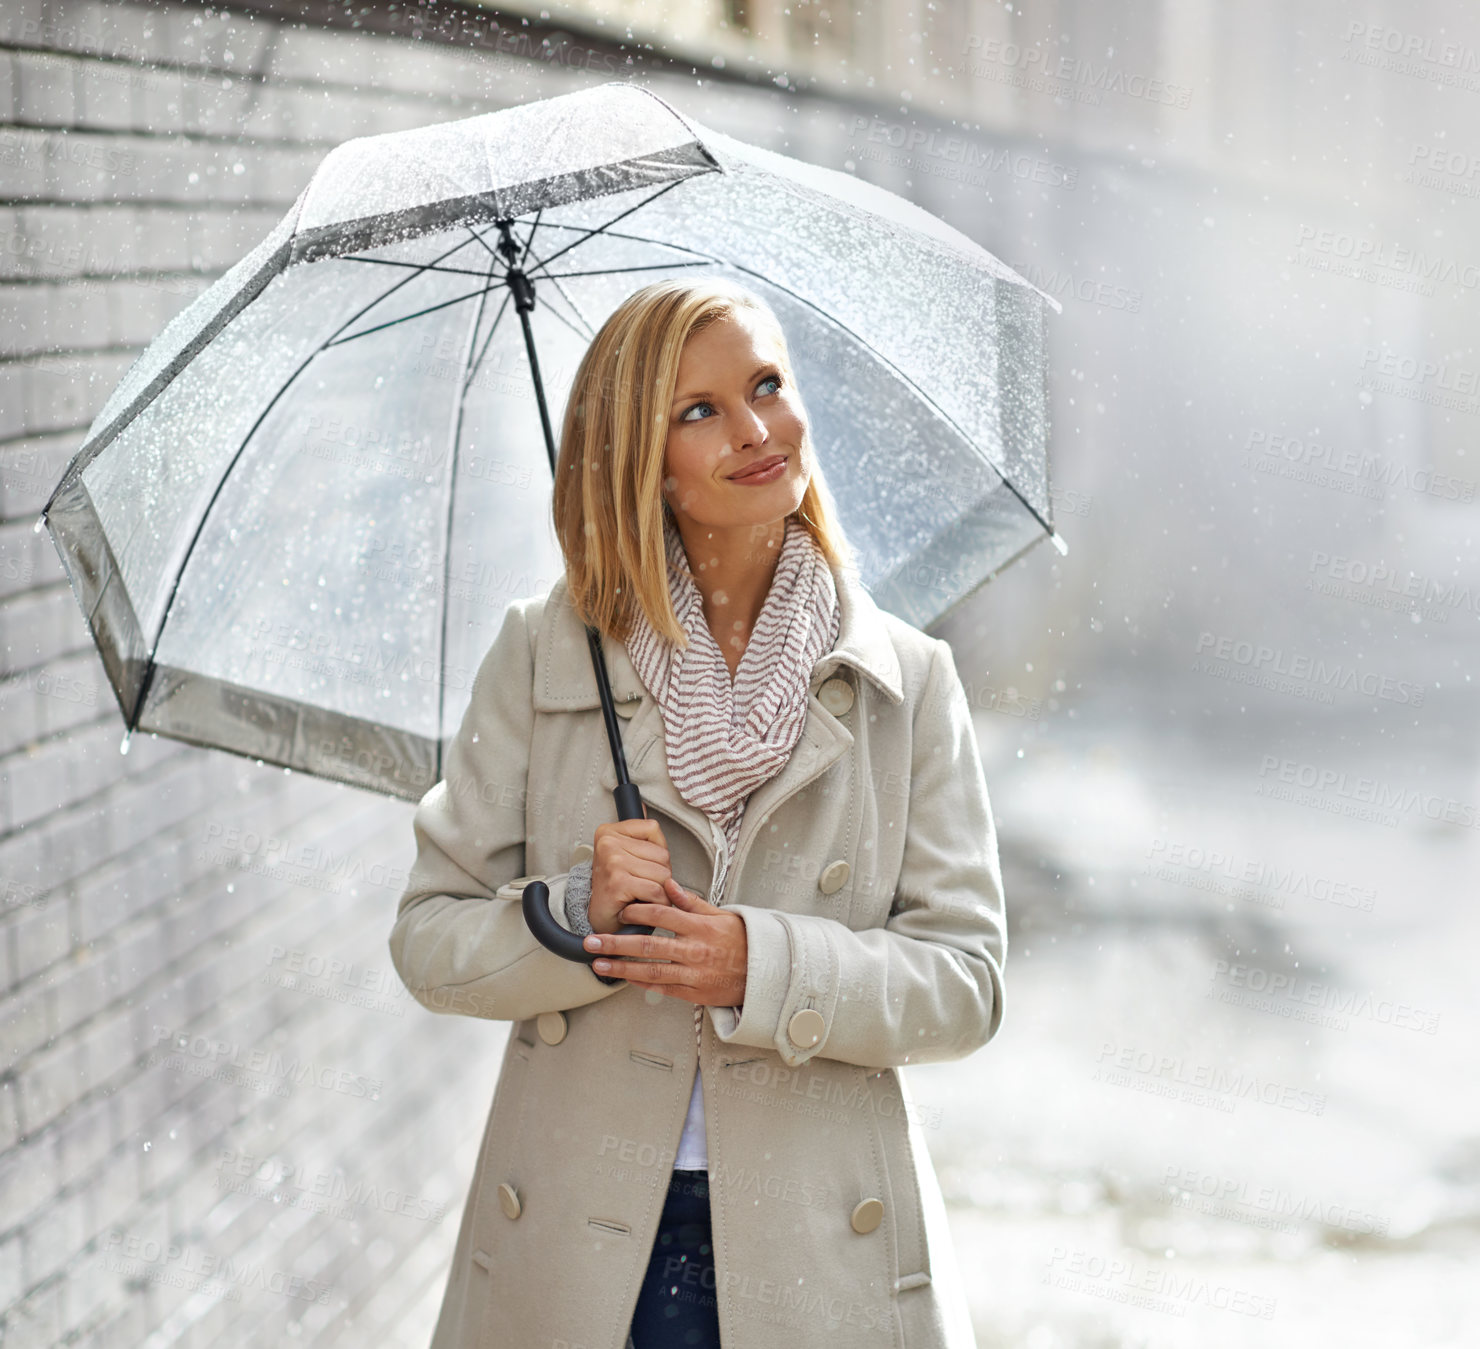 Buy stock photo Shot of a young woman walking down the street with an umbrella on a rainy day